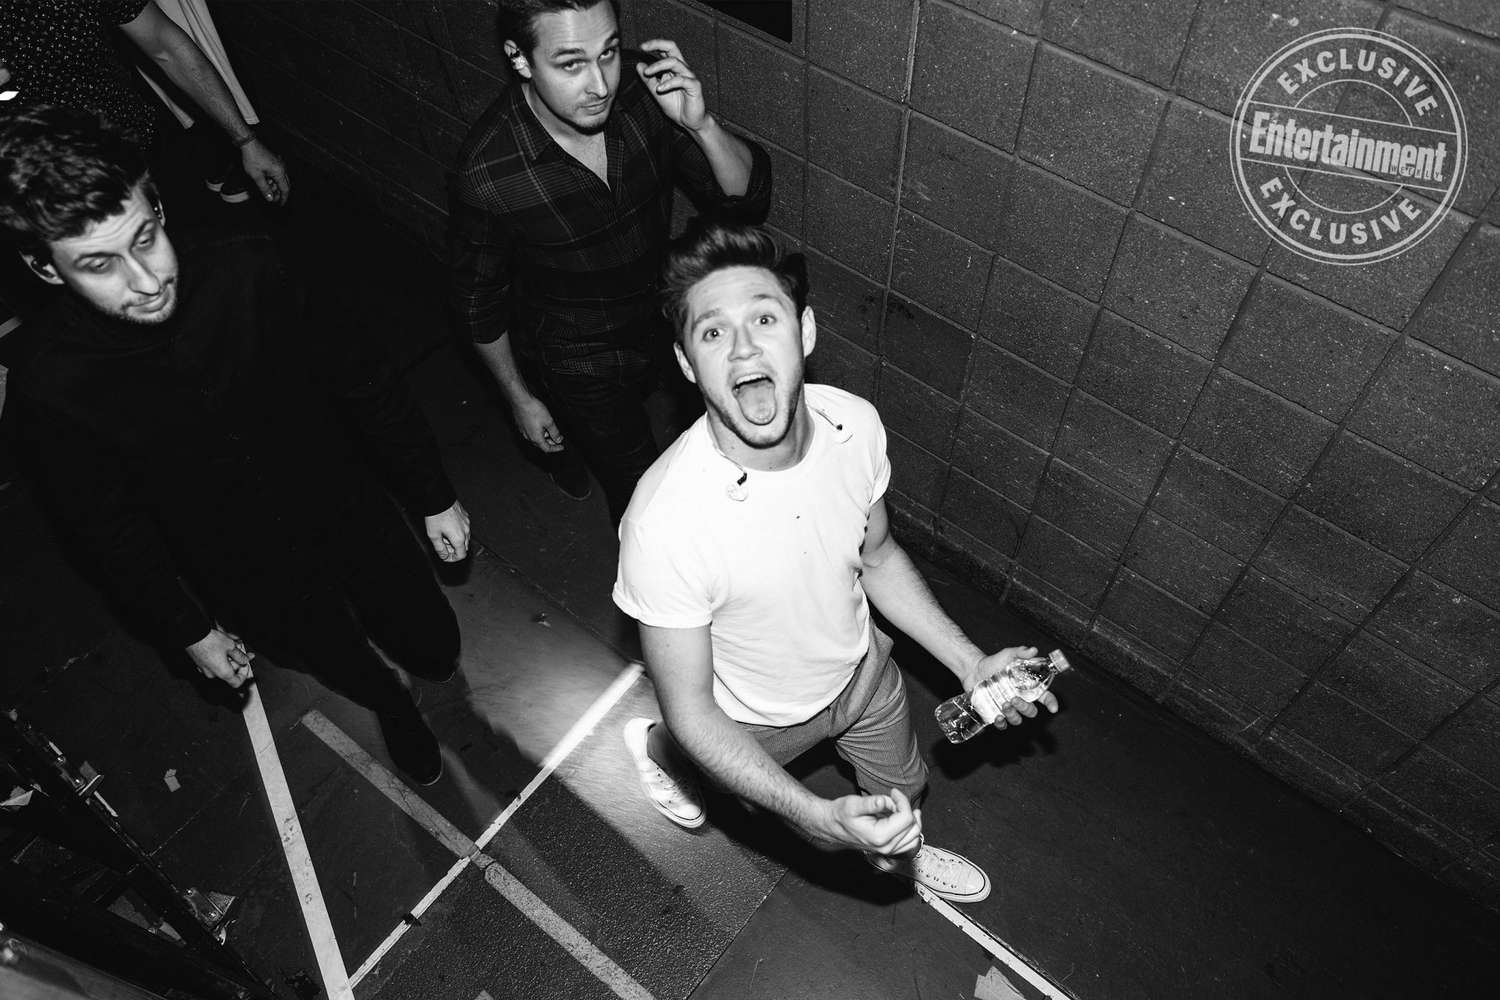 Niall HoranCredit: Christian Tierney